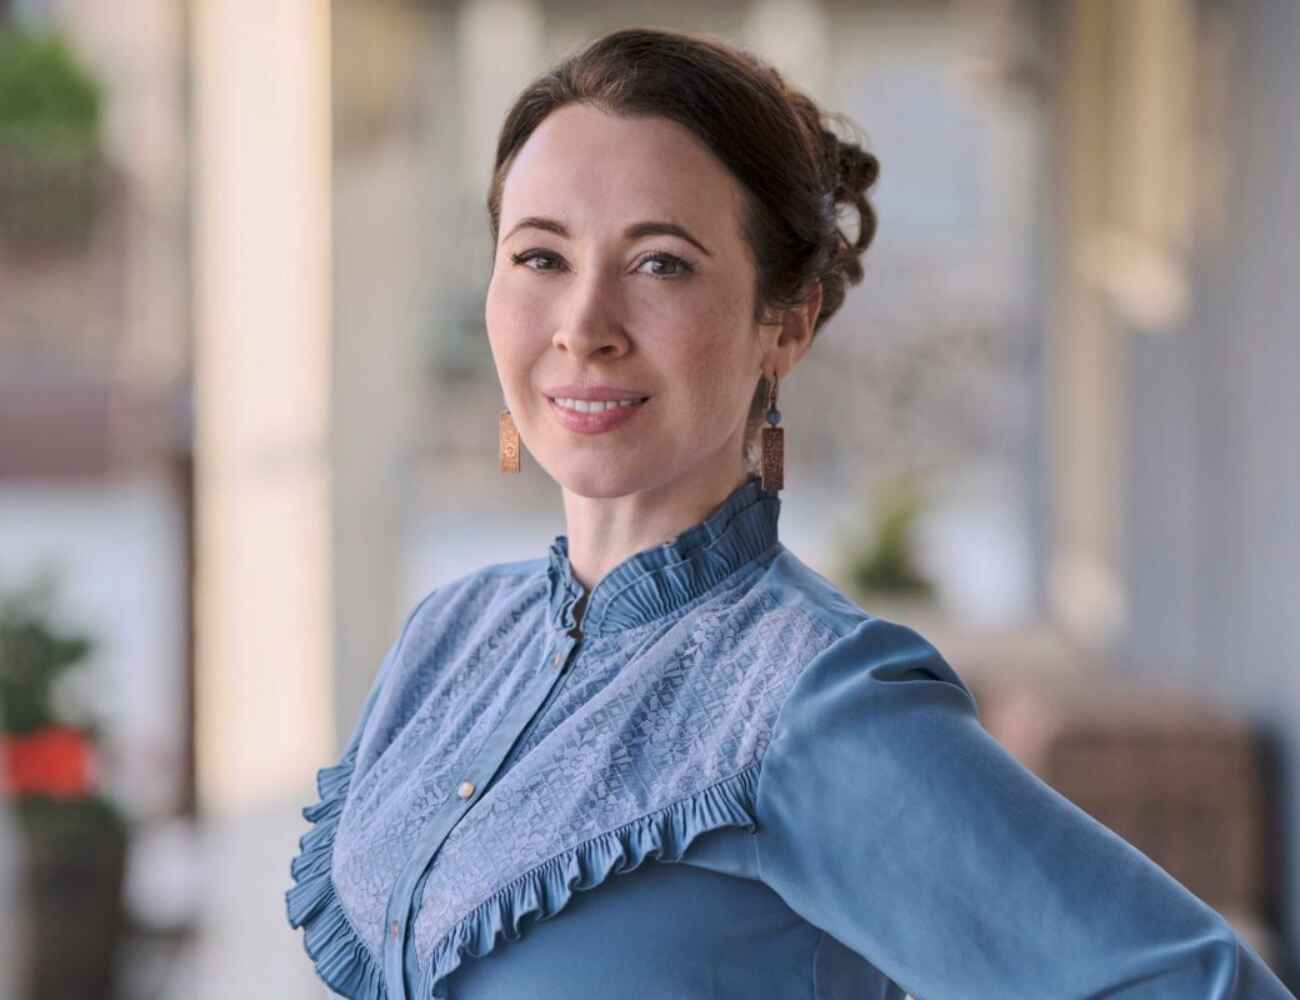 37 Facts About Loretta Walsh - Facts.net